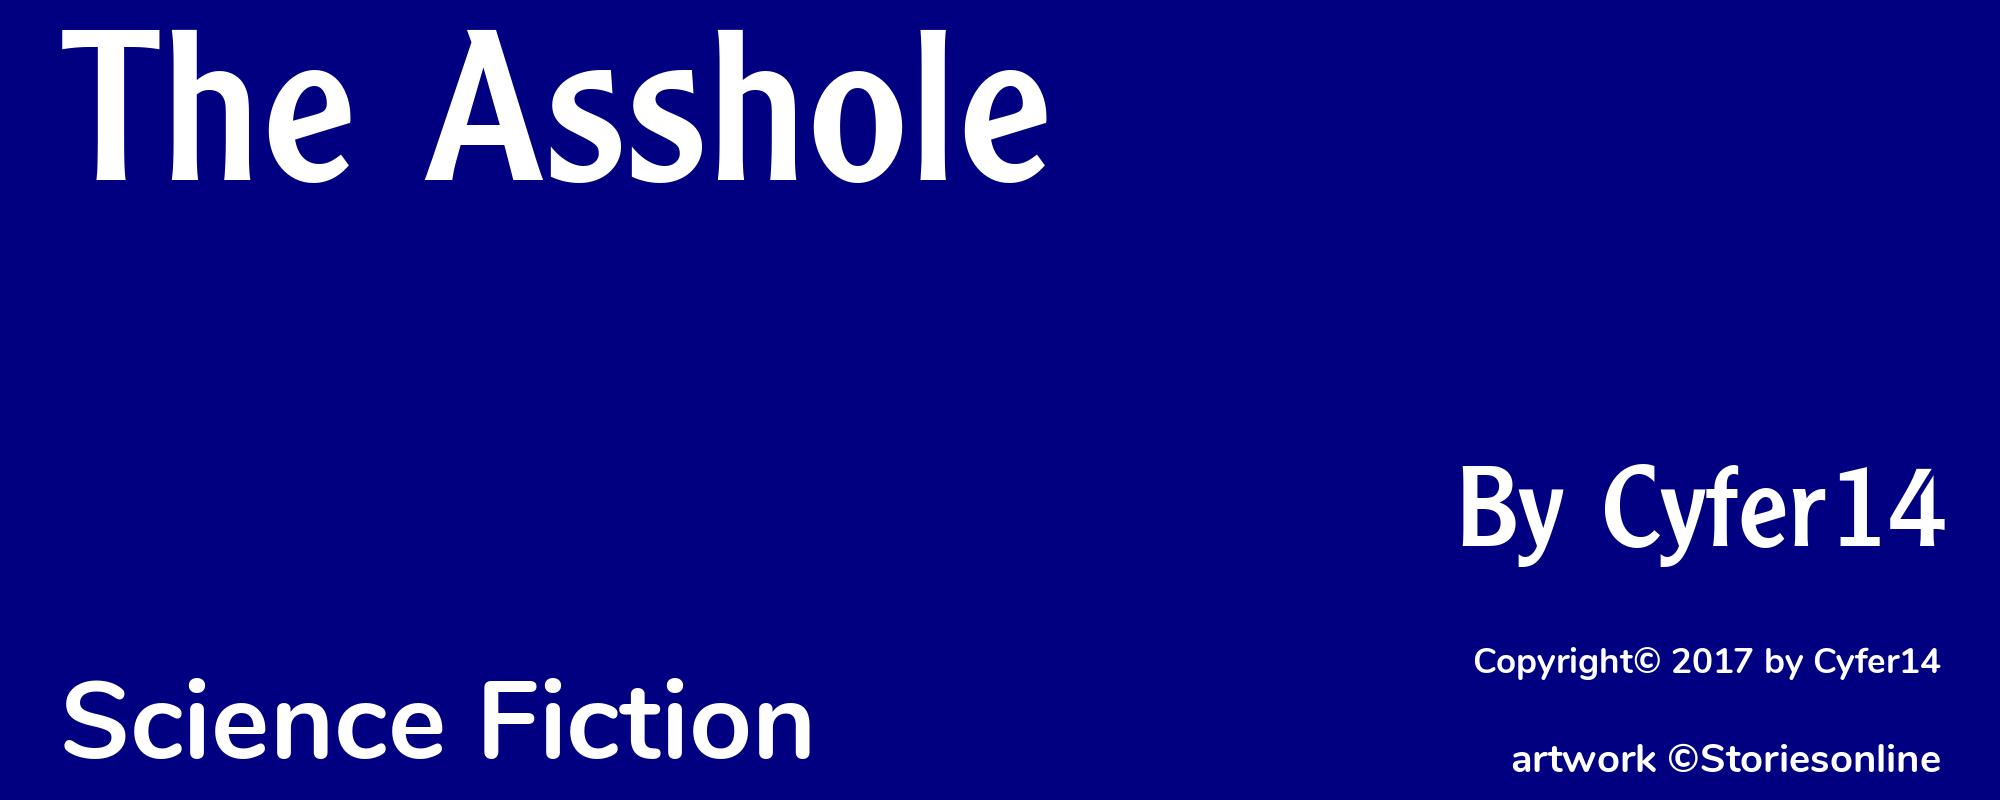 The Asshole - Cover